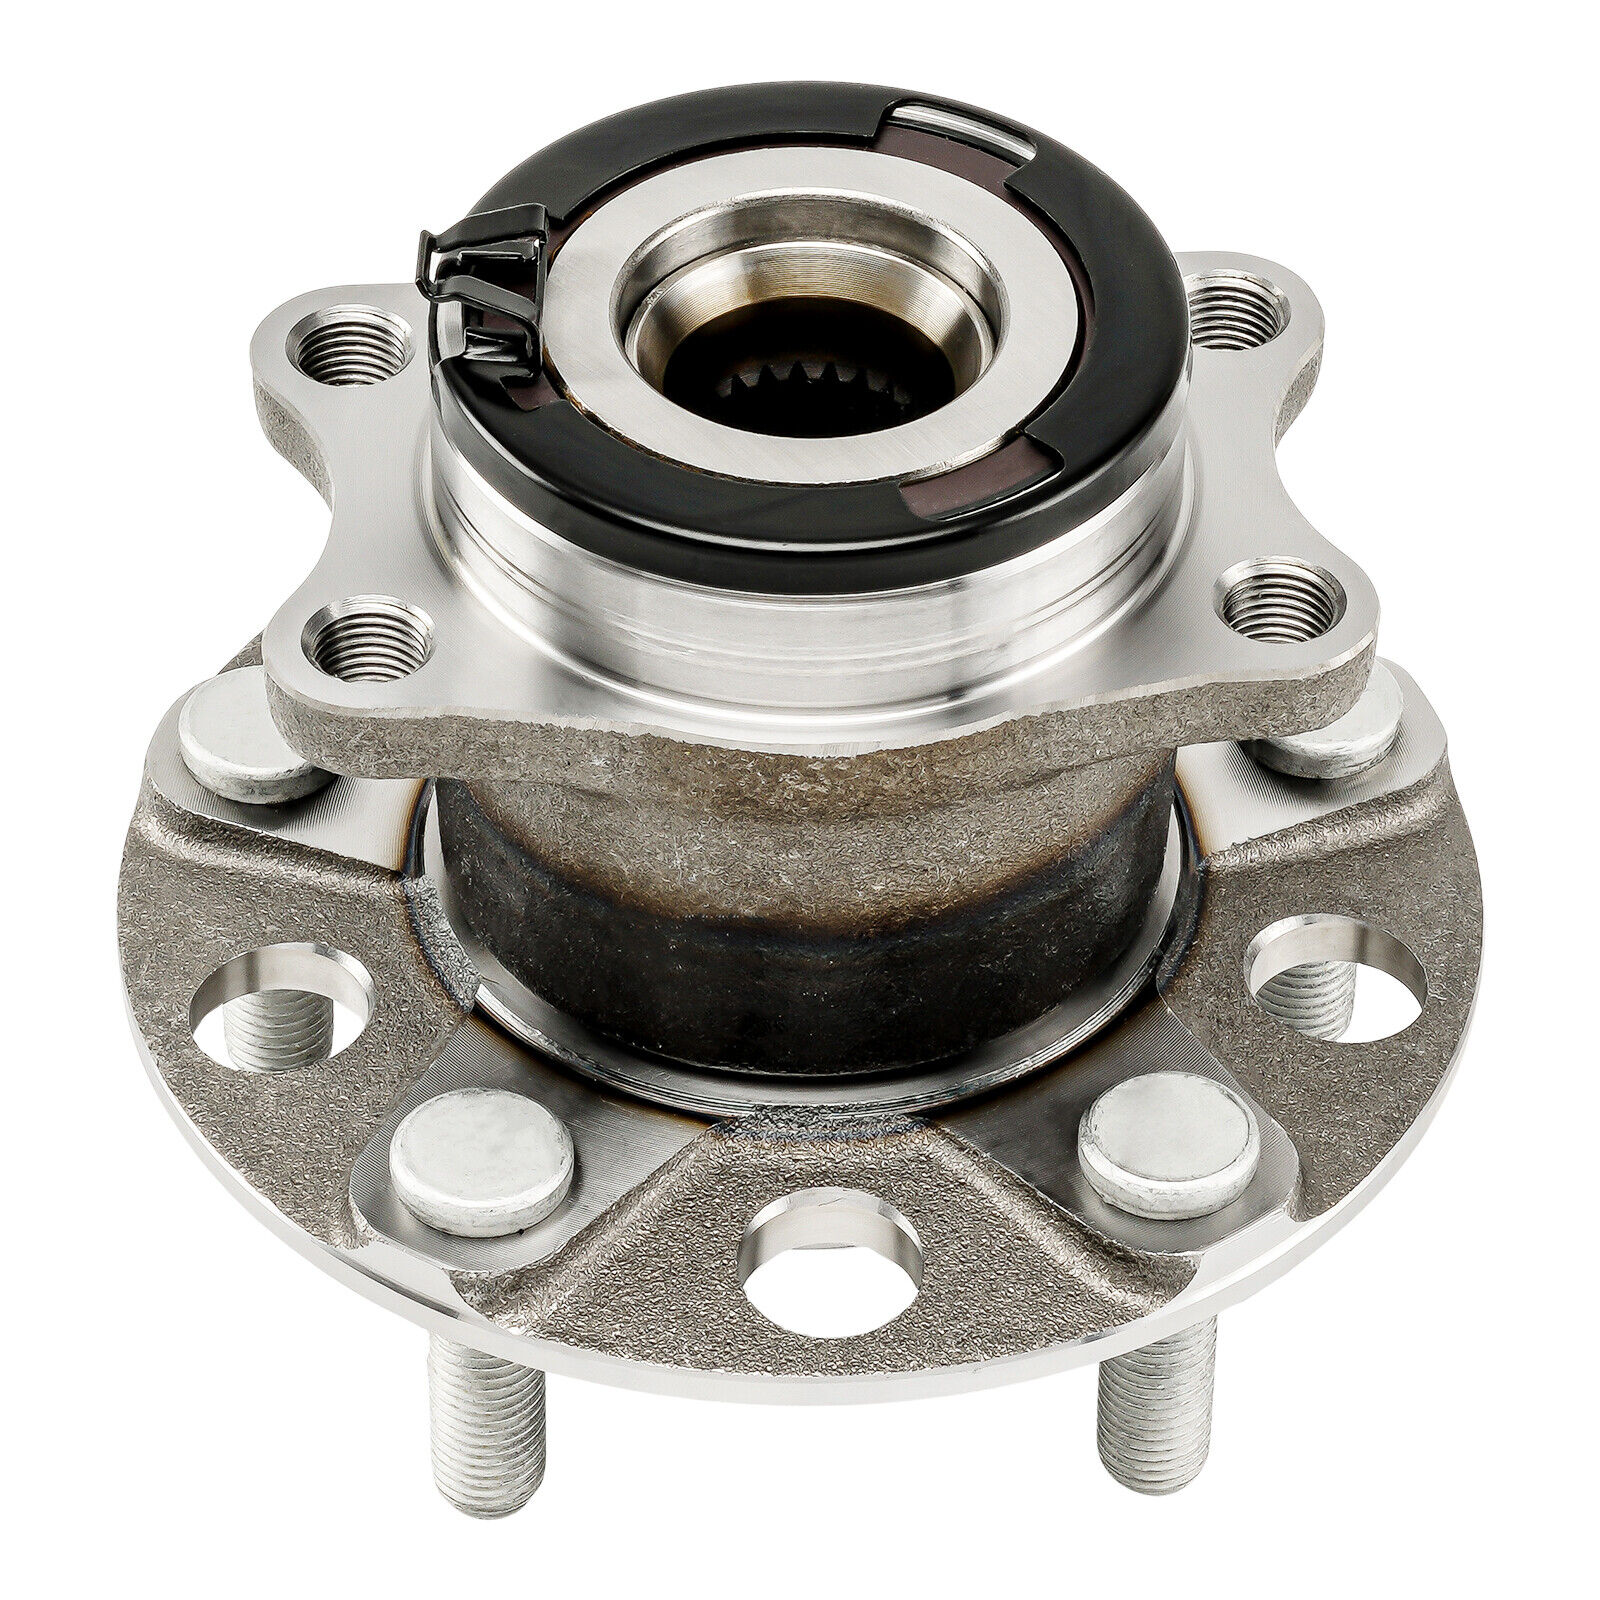 REAR Wheel Hub and Bearing Assembly for Dodge Caliber Jeep Compass Patriot 4WD